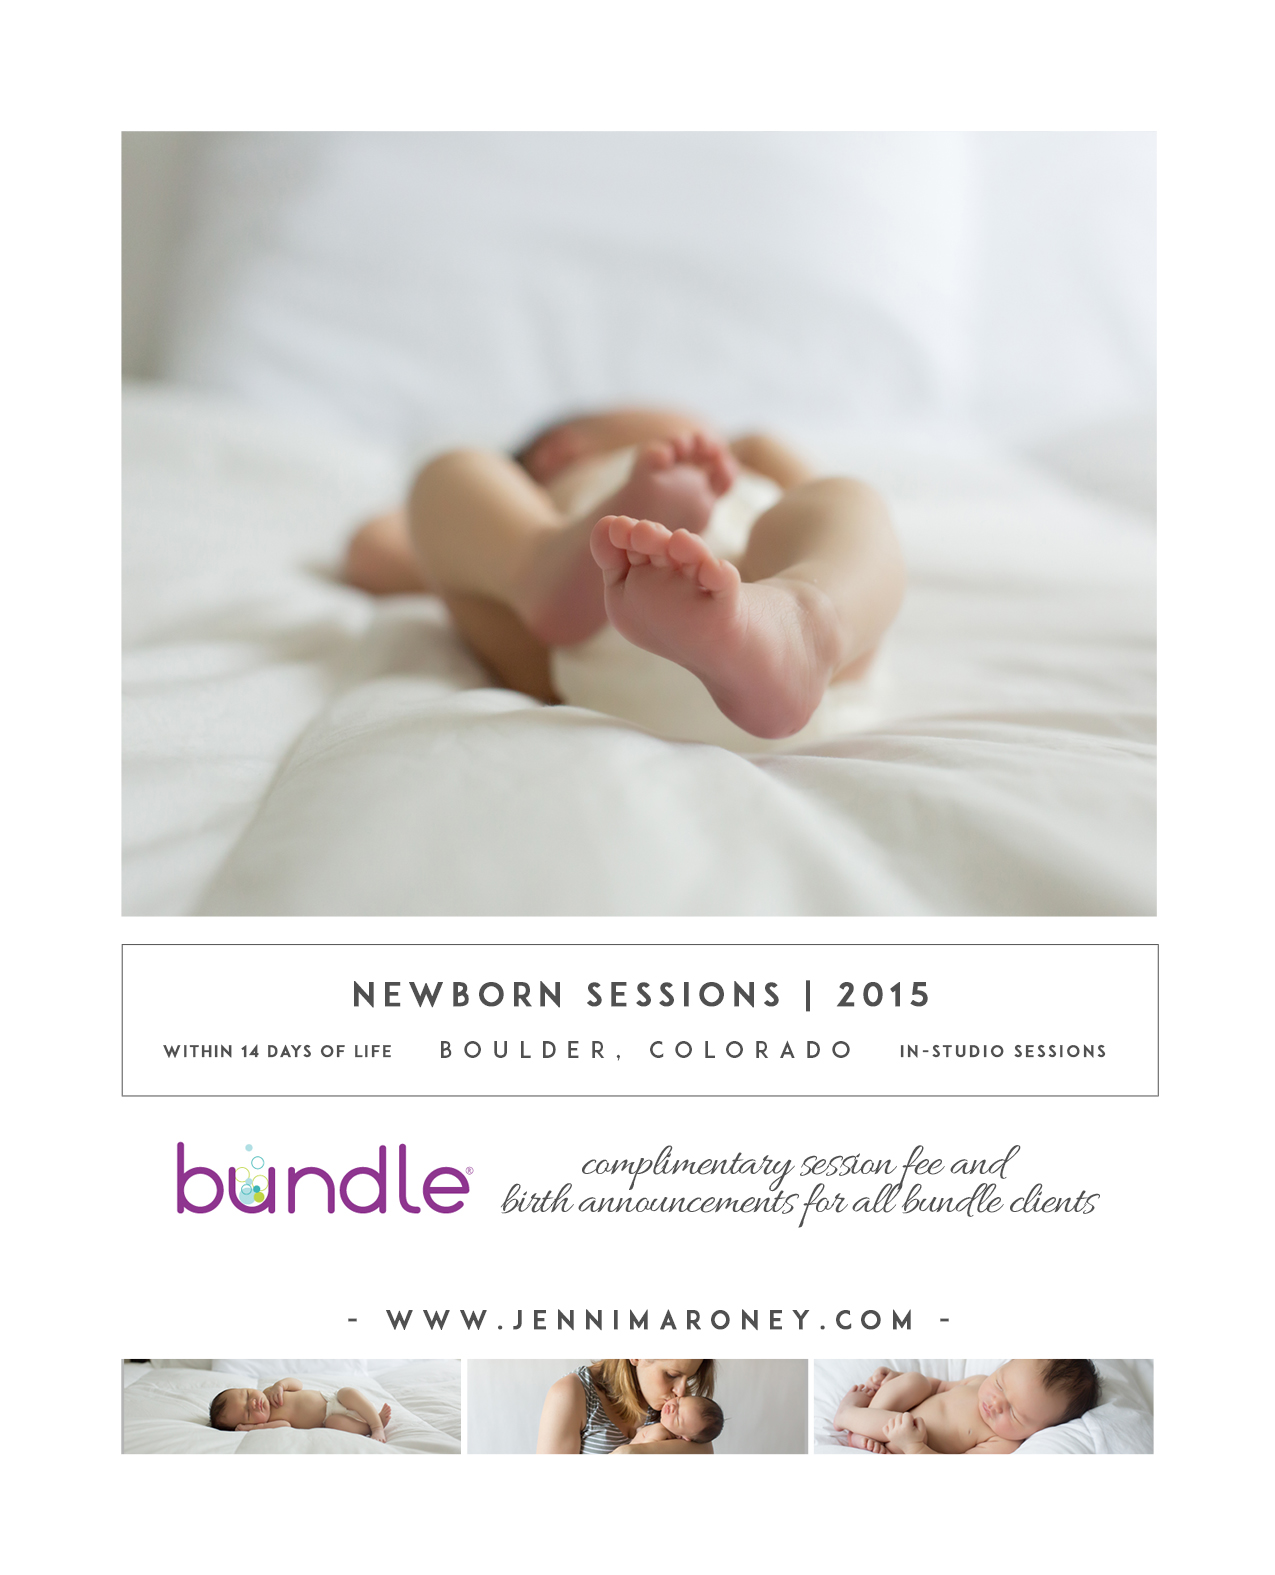 Denver newborn photographer, Jenni Maroney partners with bundle diaper service in boulder to offer complimentary session fees and birth announcements during the month of October.